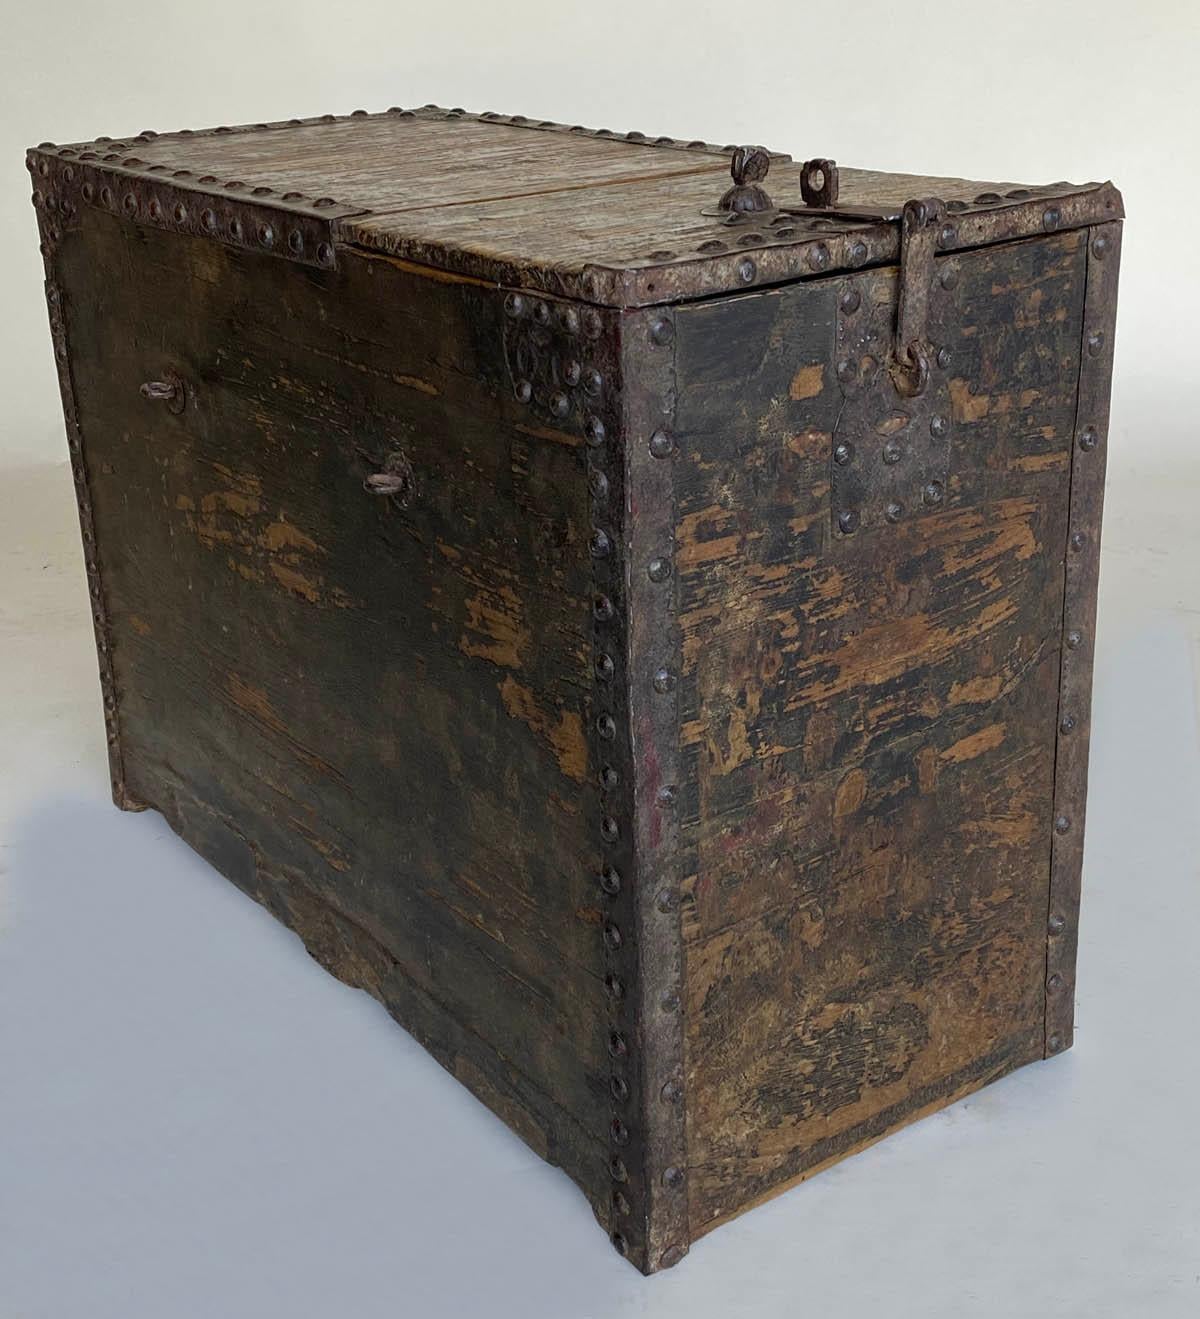 A 19th century box commonly used for storage in shops around Japan. The Edo period box features a partial lift top that gives access to interior of box. Intricate little star designed studs in corners and all original hardware. Beautiful old worn